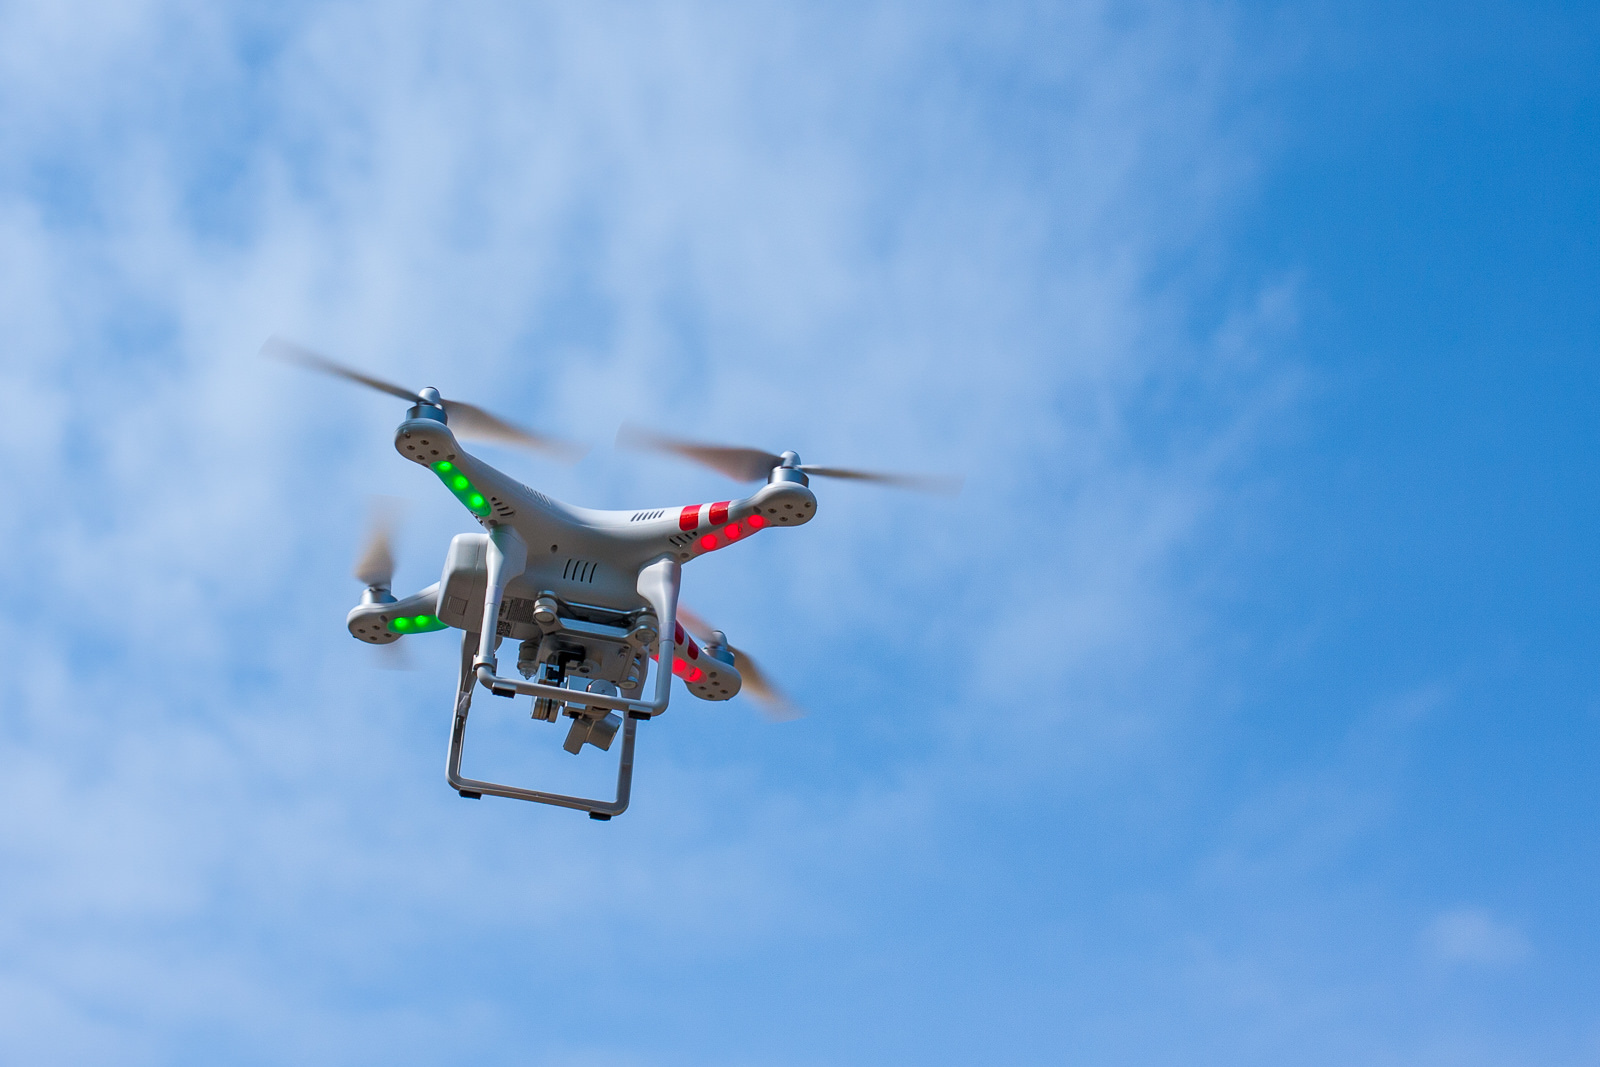 NFL Receives Permission To Use Drones For Filming, Just Not Actual Games